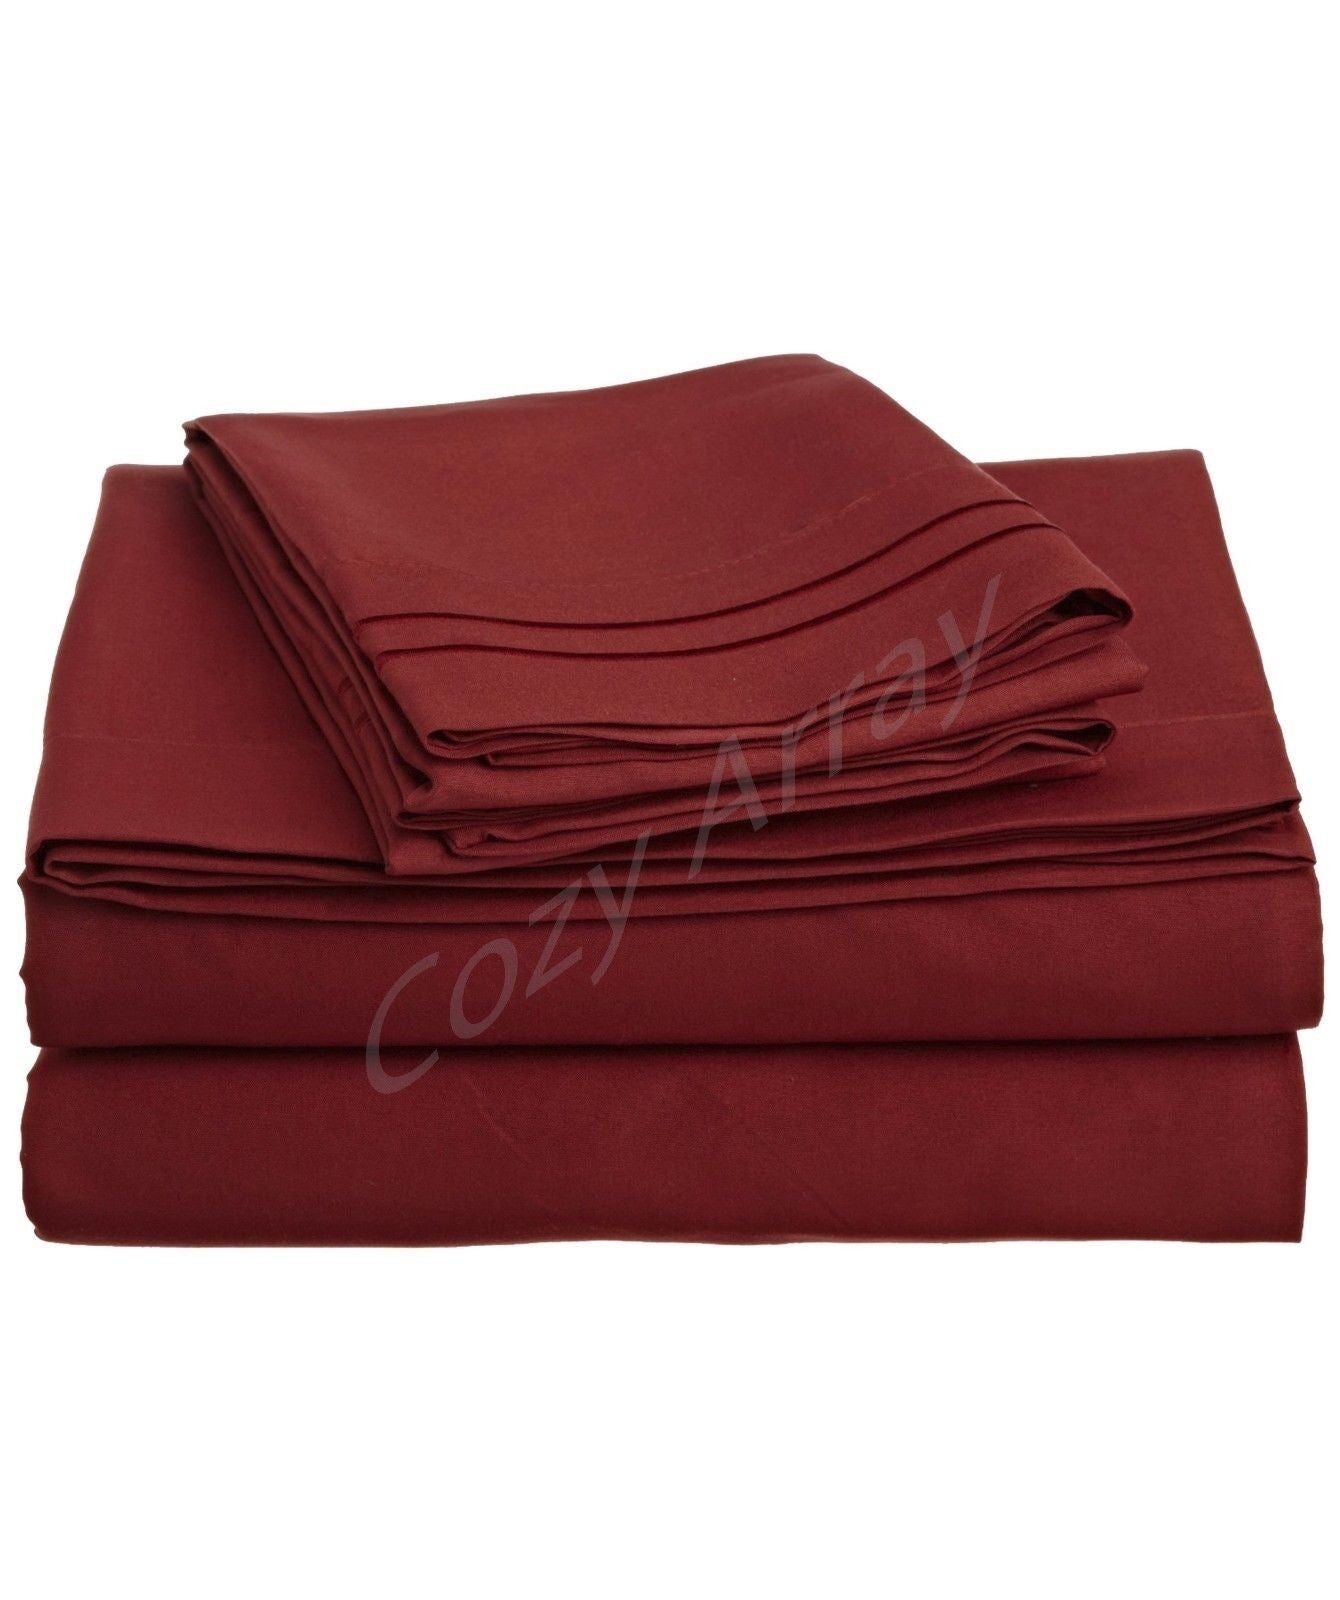 Bed Sheets - Deep Pocket Bed Sheets- 4 Piece Set, Queen, King, Twin, or Full Size - King / Burgundy Red